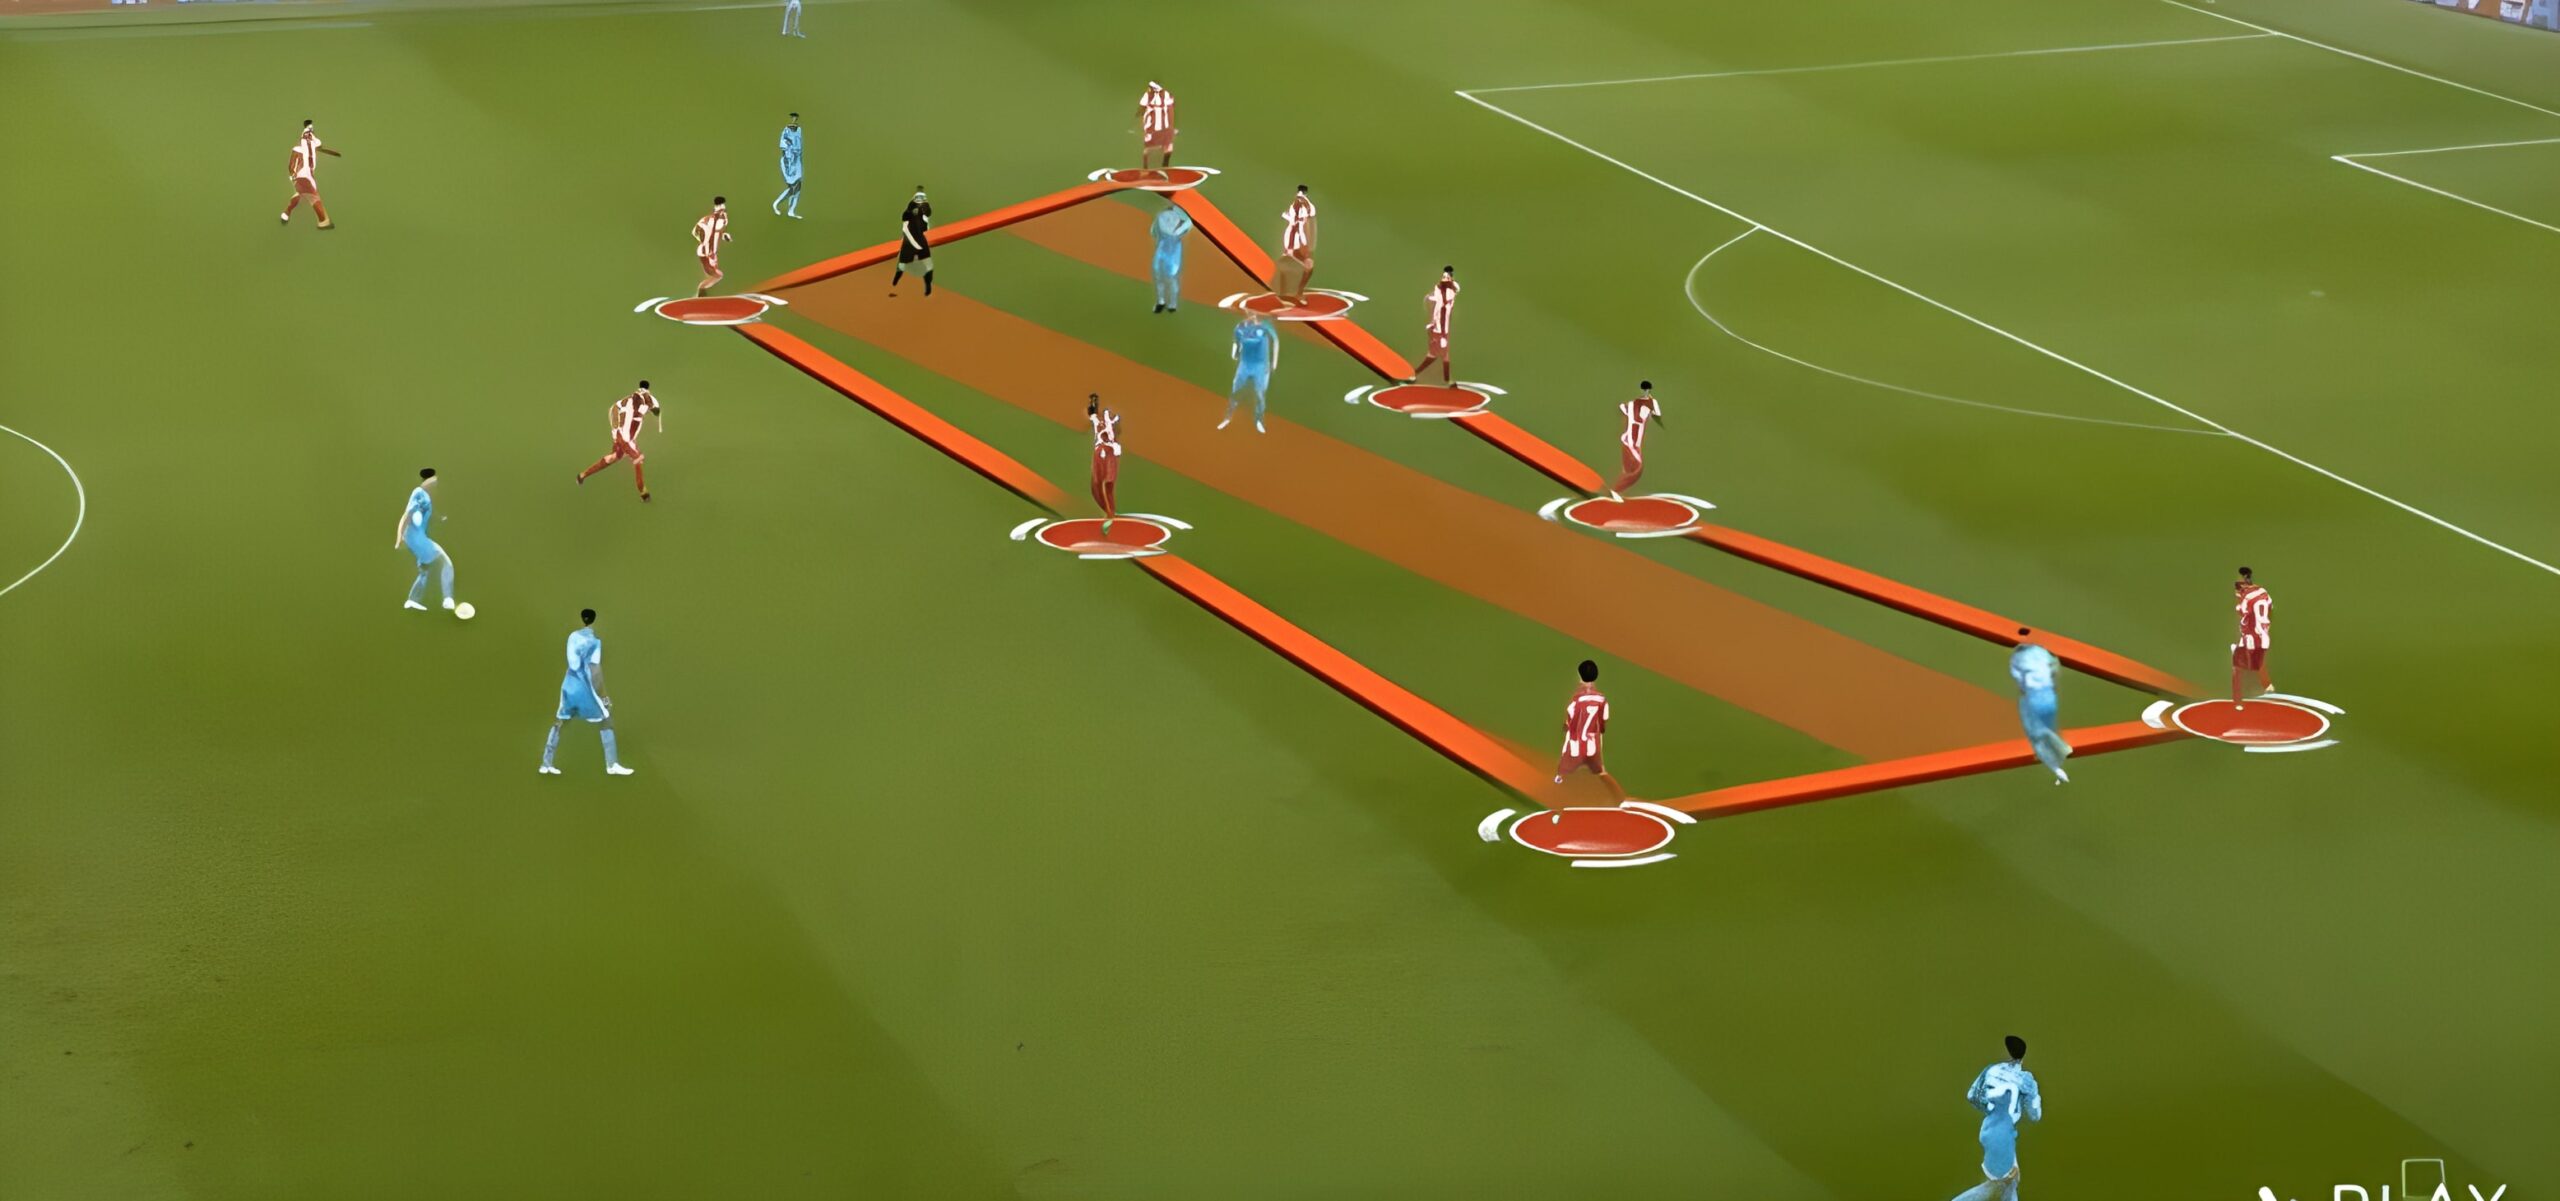 Atletico Madrid play a low block against Manchester City